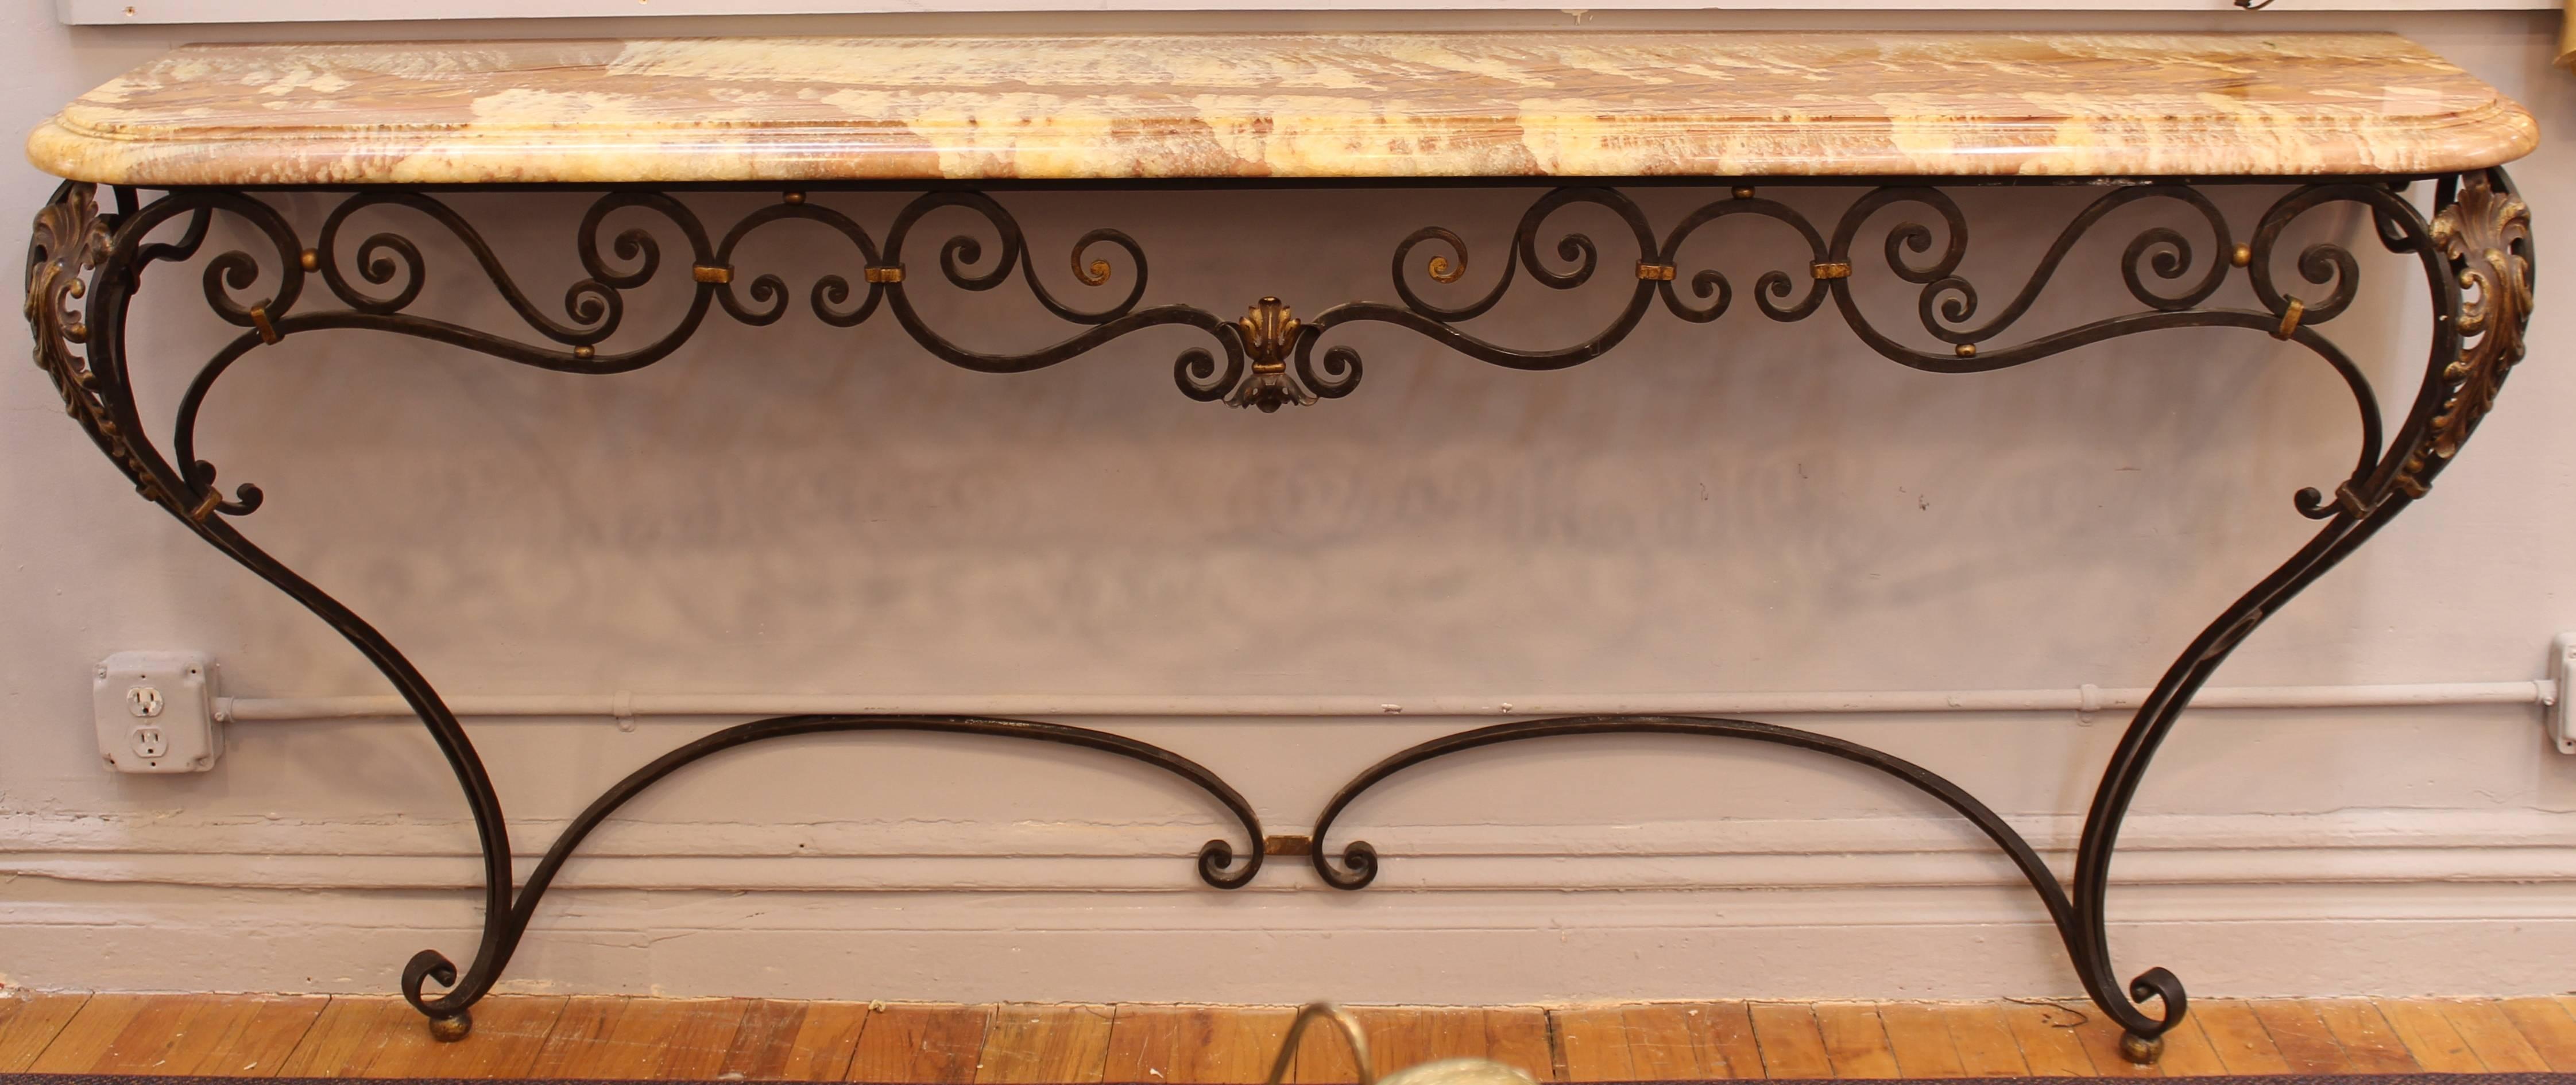 A neoclassical style sideboard made of a wrought iron base with gold accents, with a shaped marble-top in shades of brown and rose. The piece is in good condition, with a large scratch on the upper left side of the marble-top.